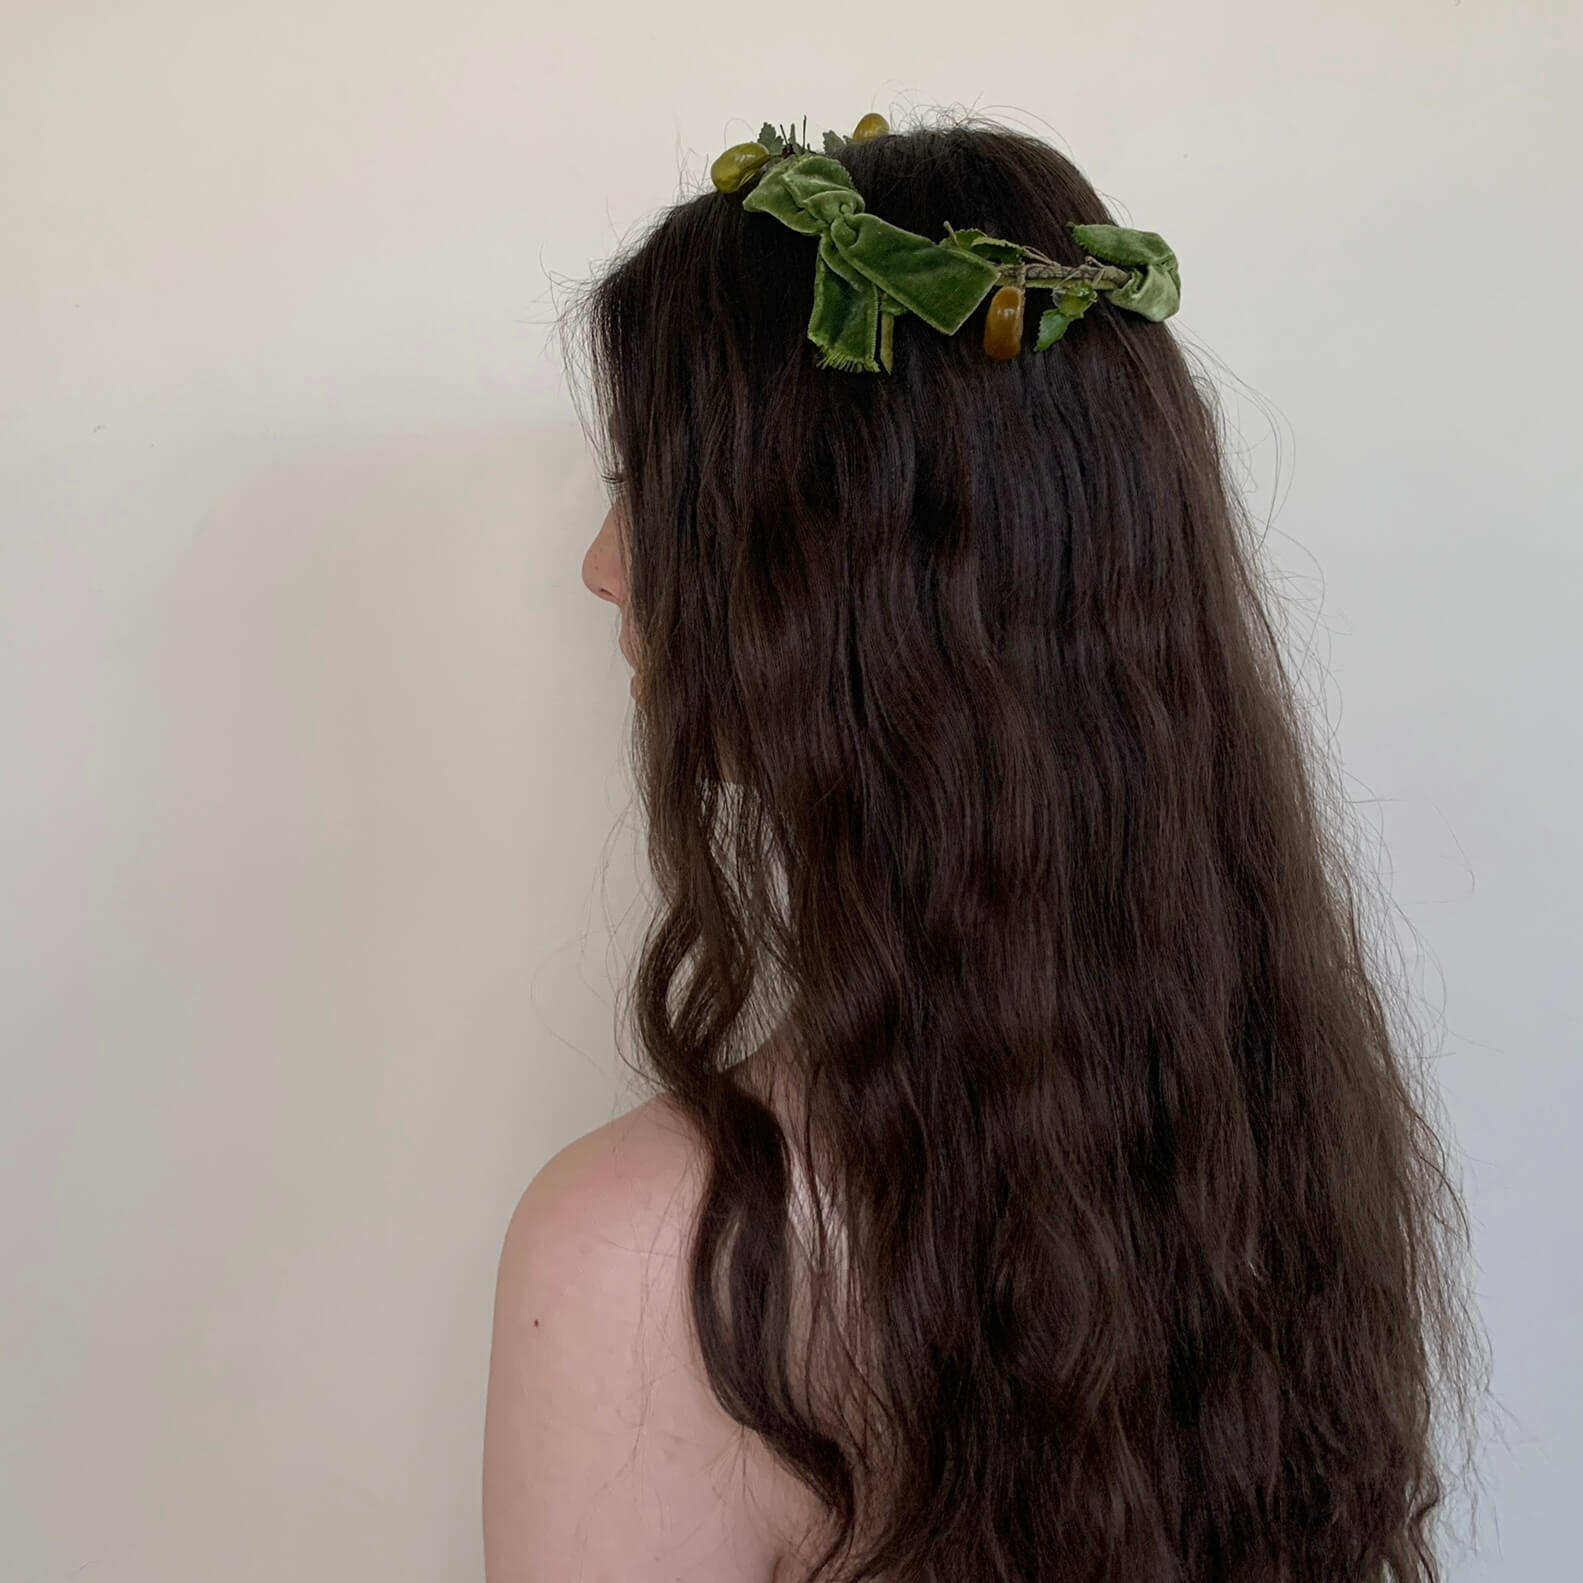 back view of the green crown showing the velvet bows